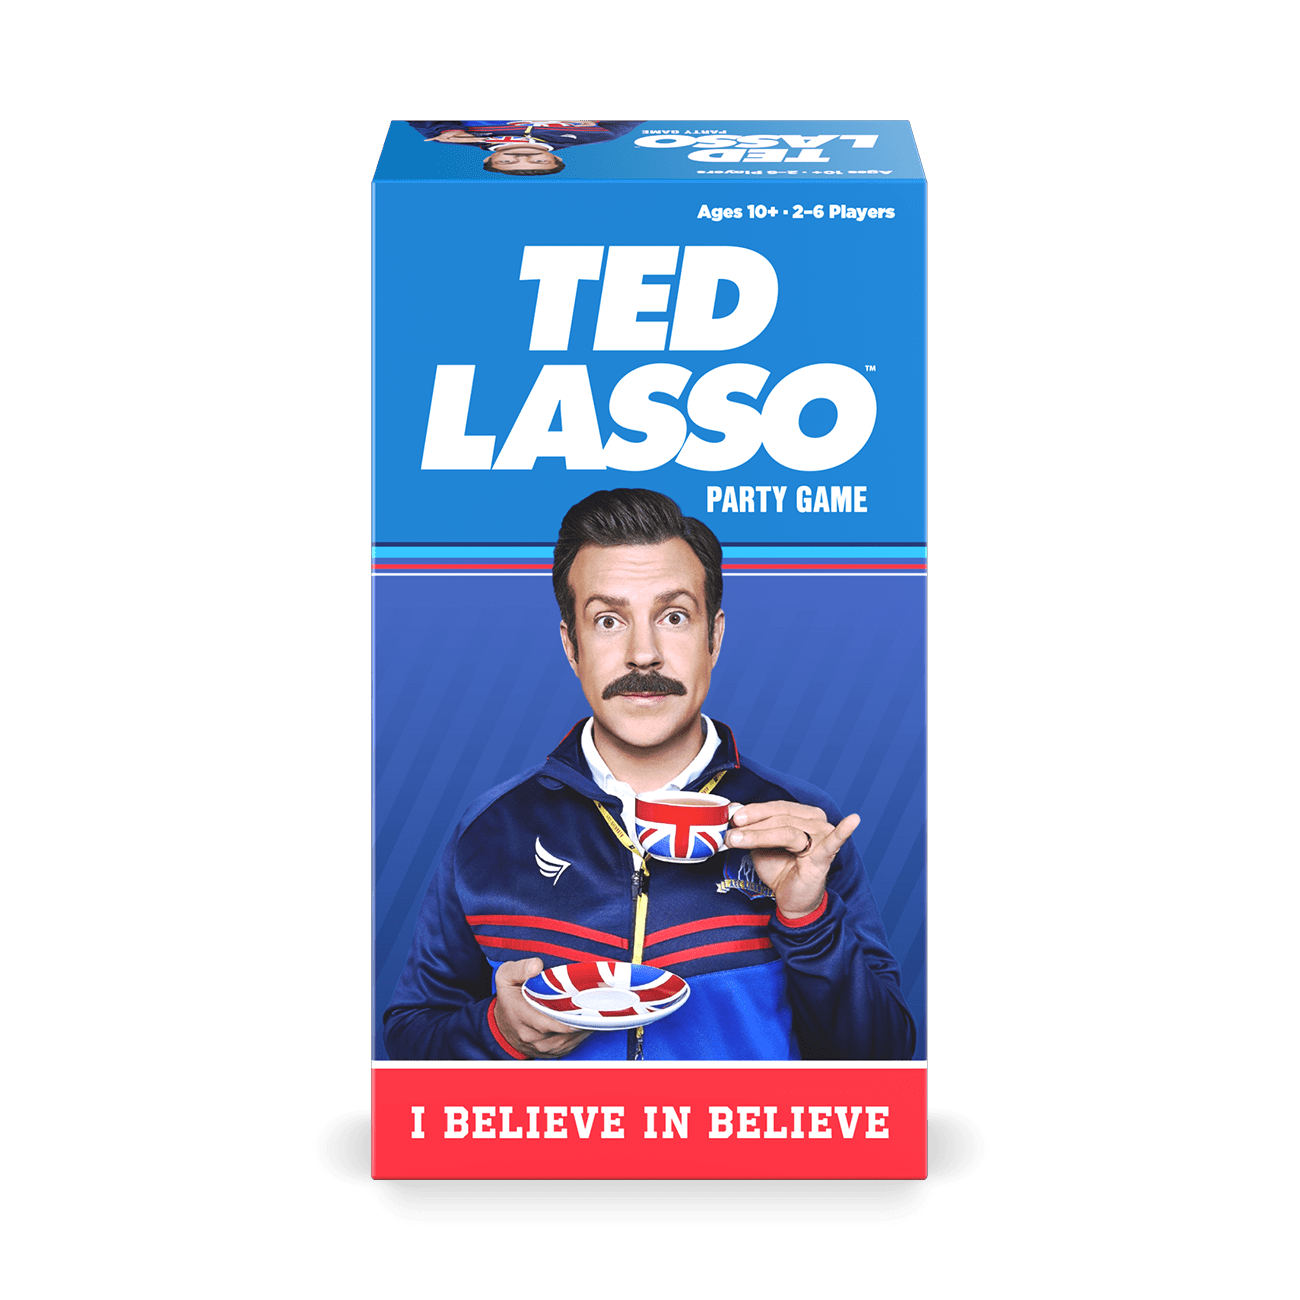 Ted Lasso Party Game art